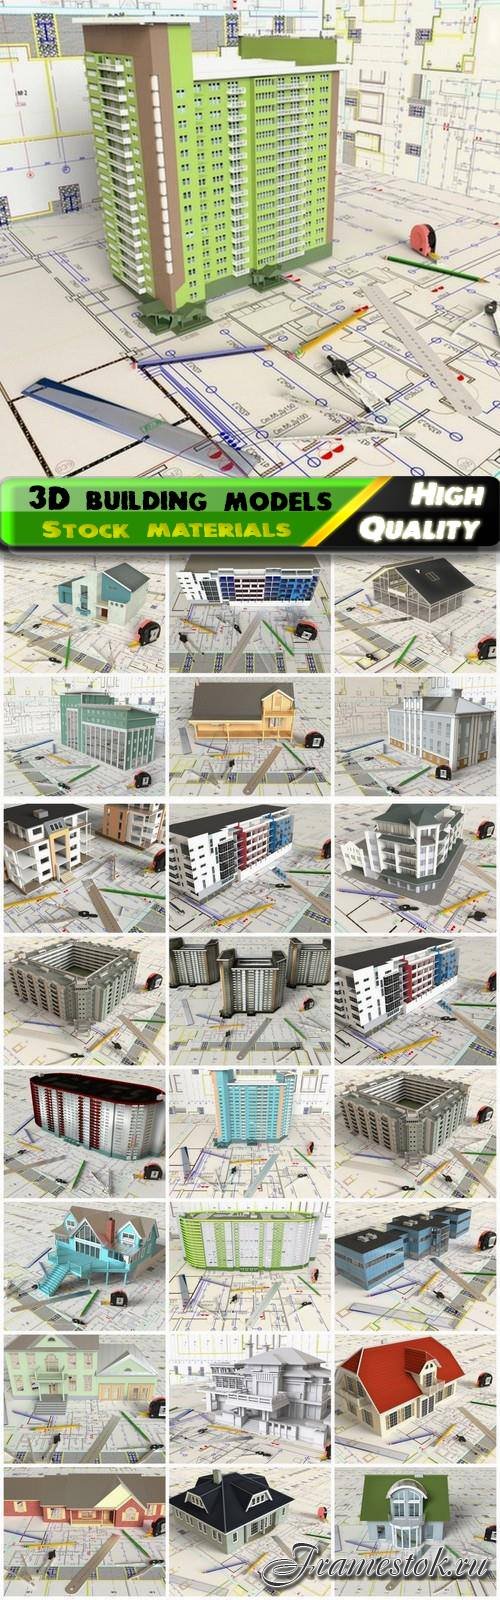 Architecture drawings building and layout of house - 25 HQ Jpg